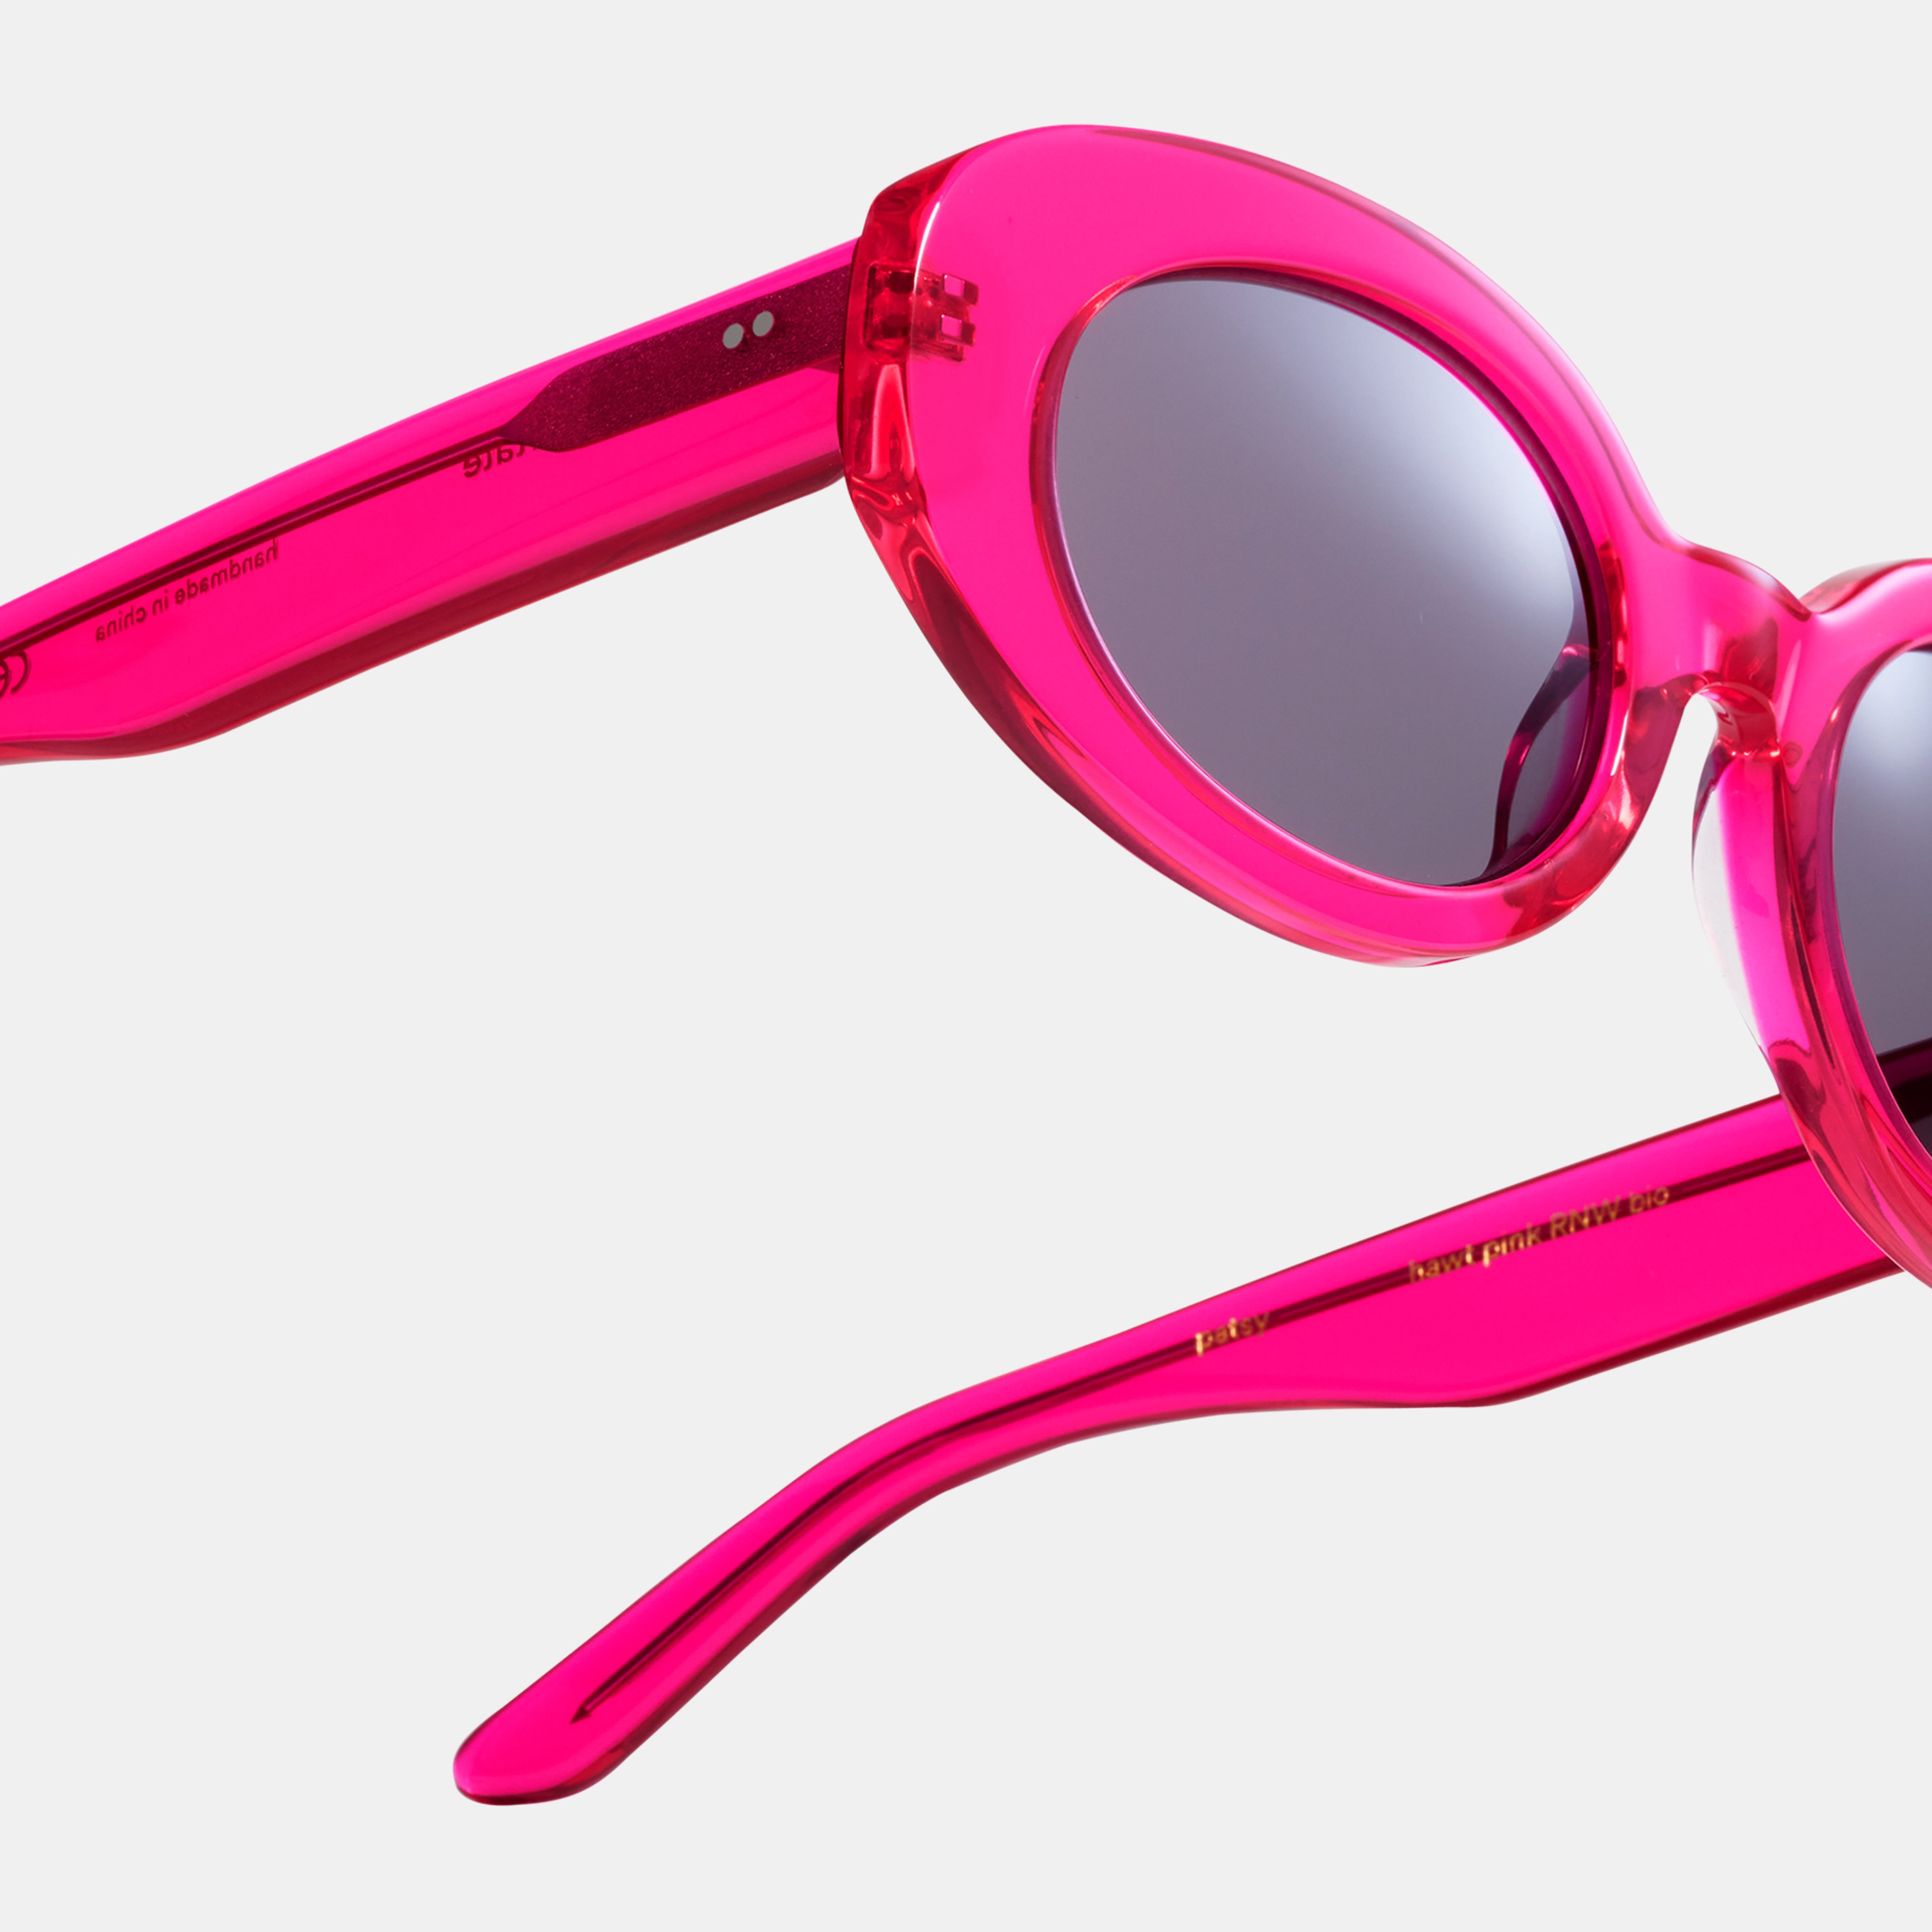 Ace & Tate Solaires | oval Renew bio-acétate in Rose